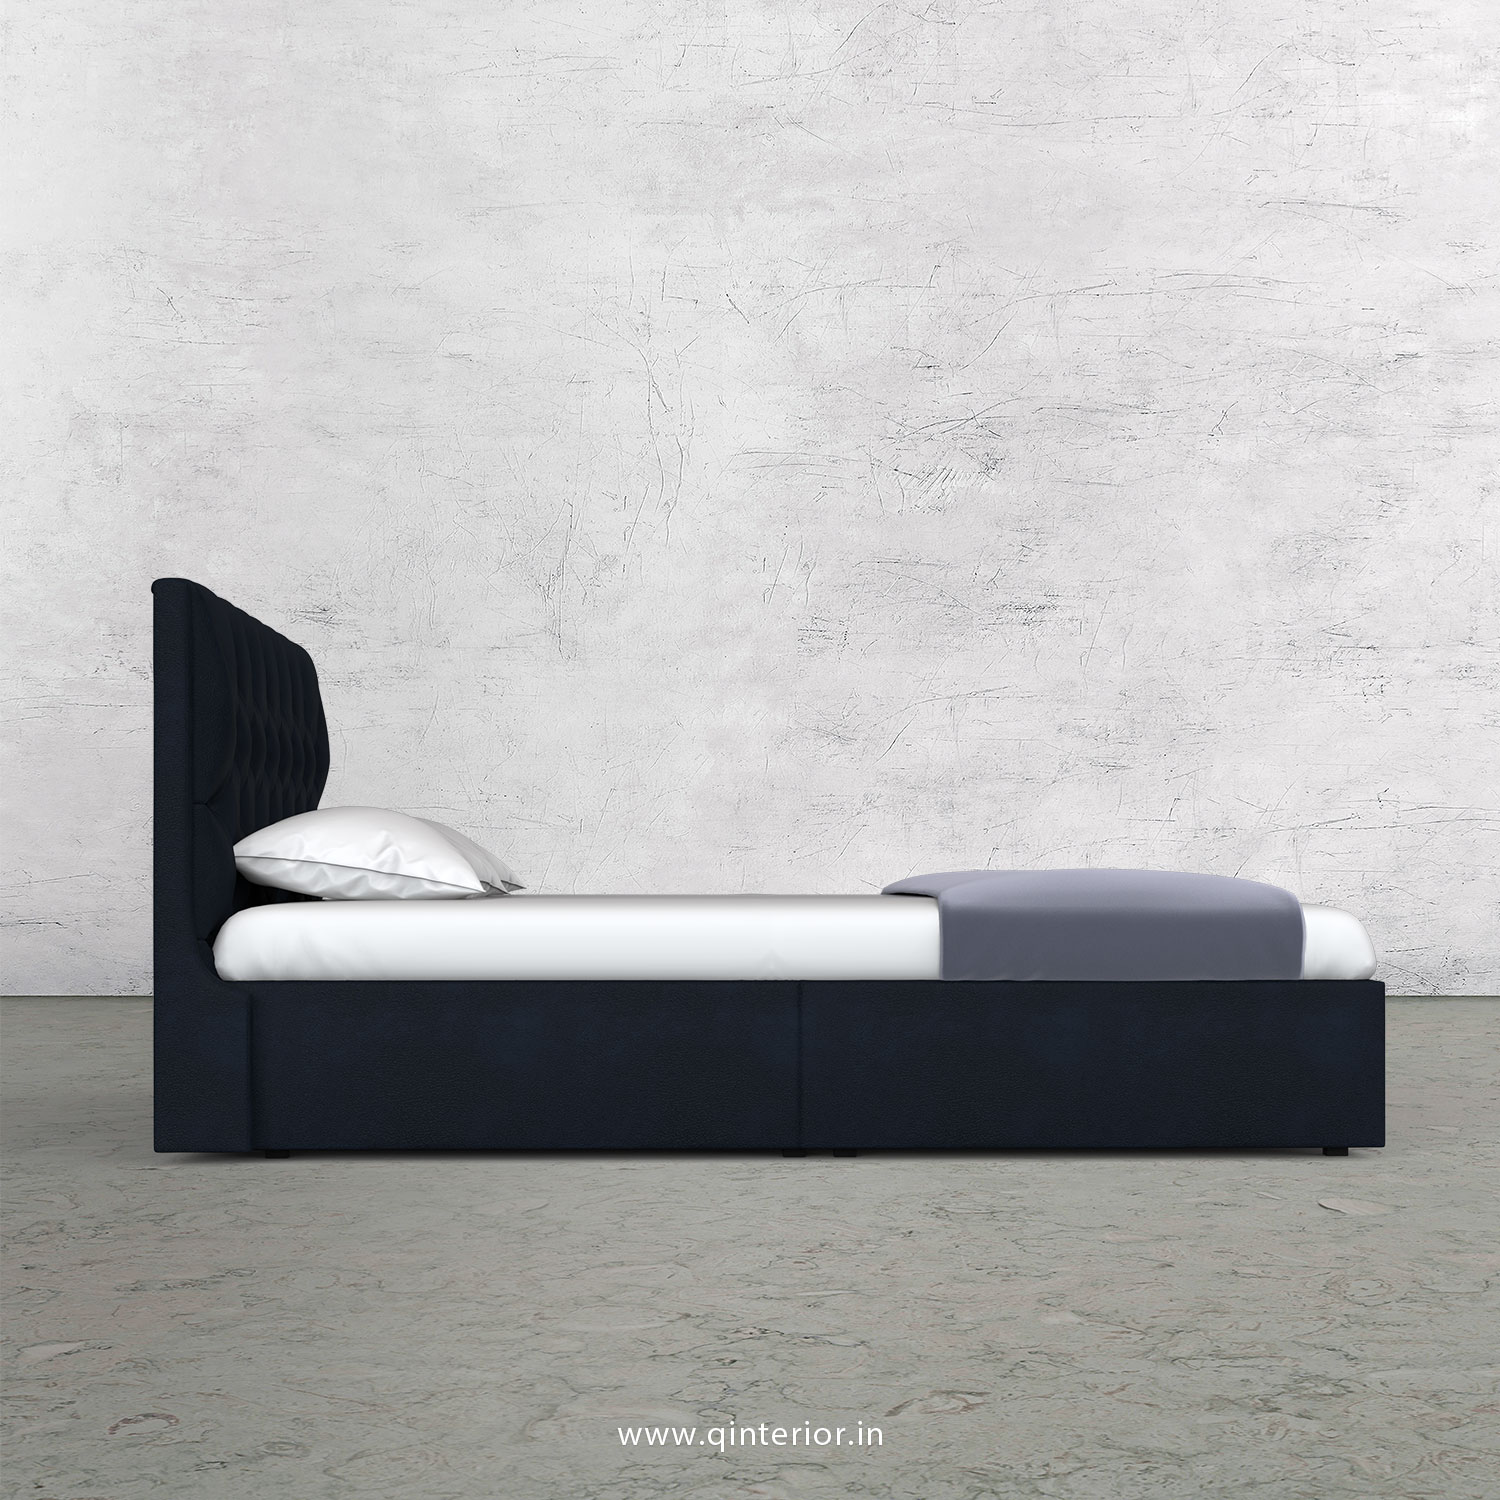 Scorpius King Size Storage Bed in Fab Leather Fabric - KBD001 FL05